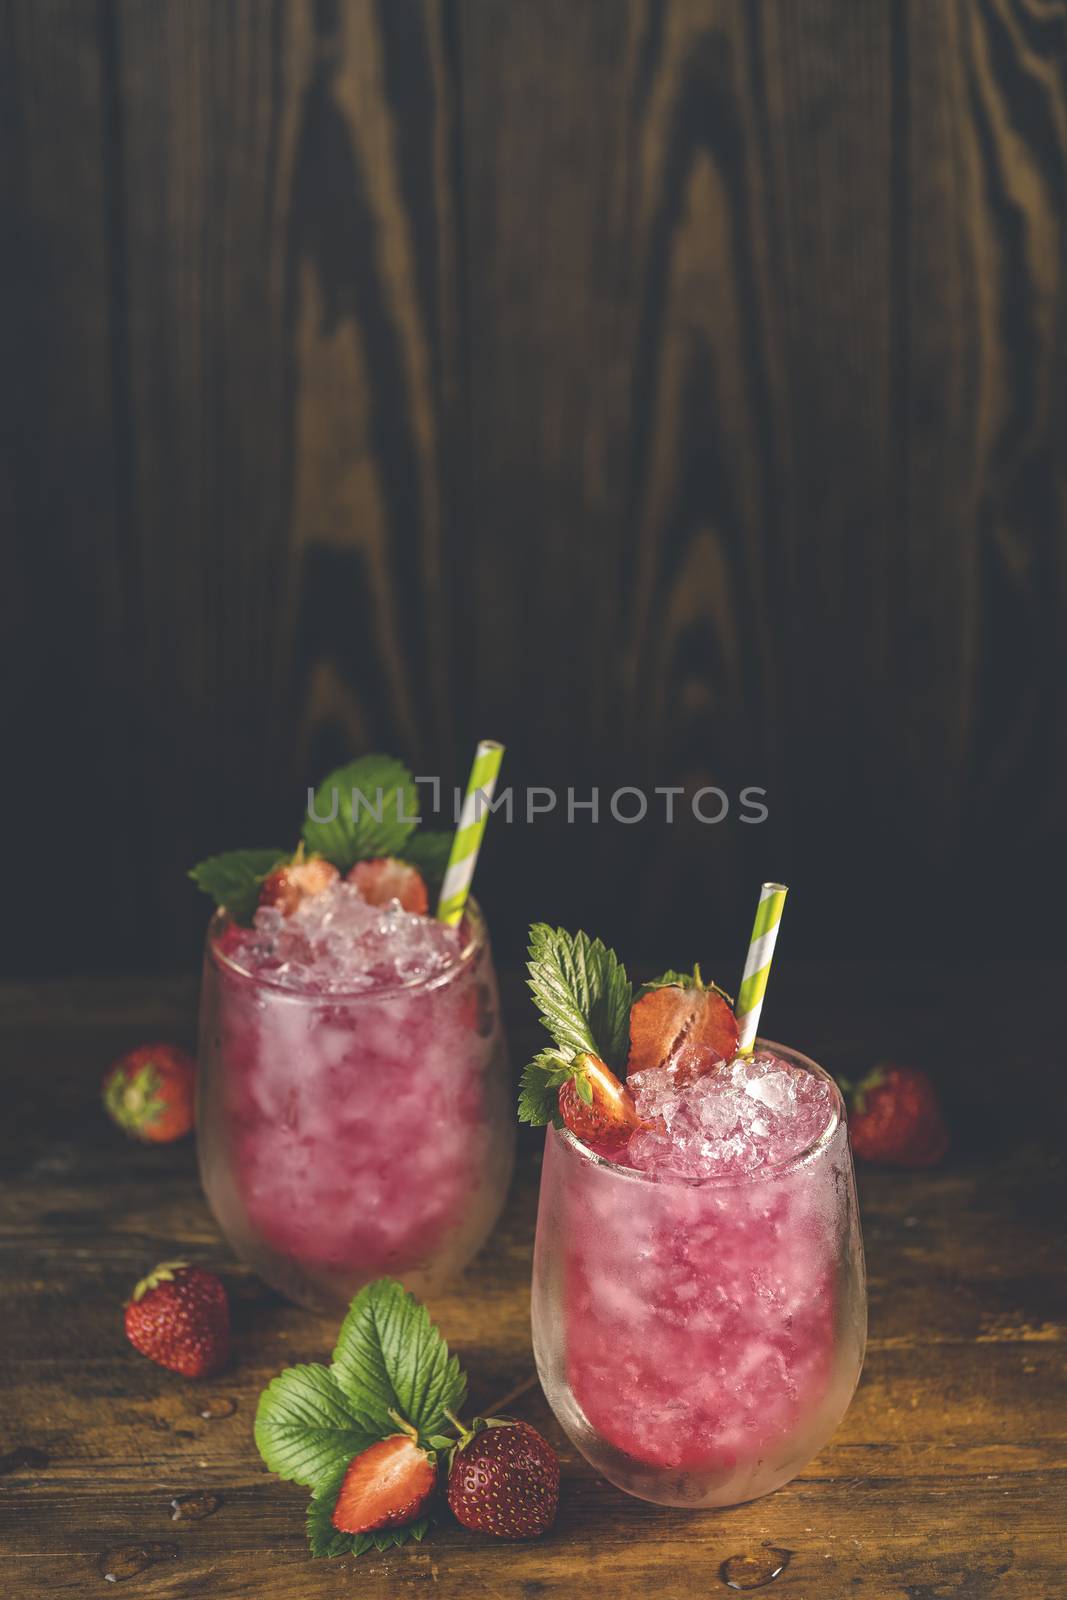 Strawberry drink with ice. Two glass of strawberry ice drink wit by ArtSvitlyna